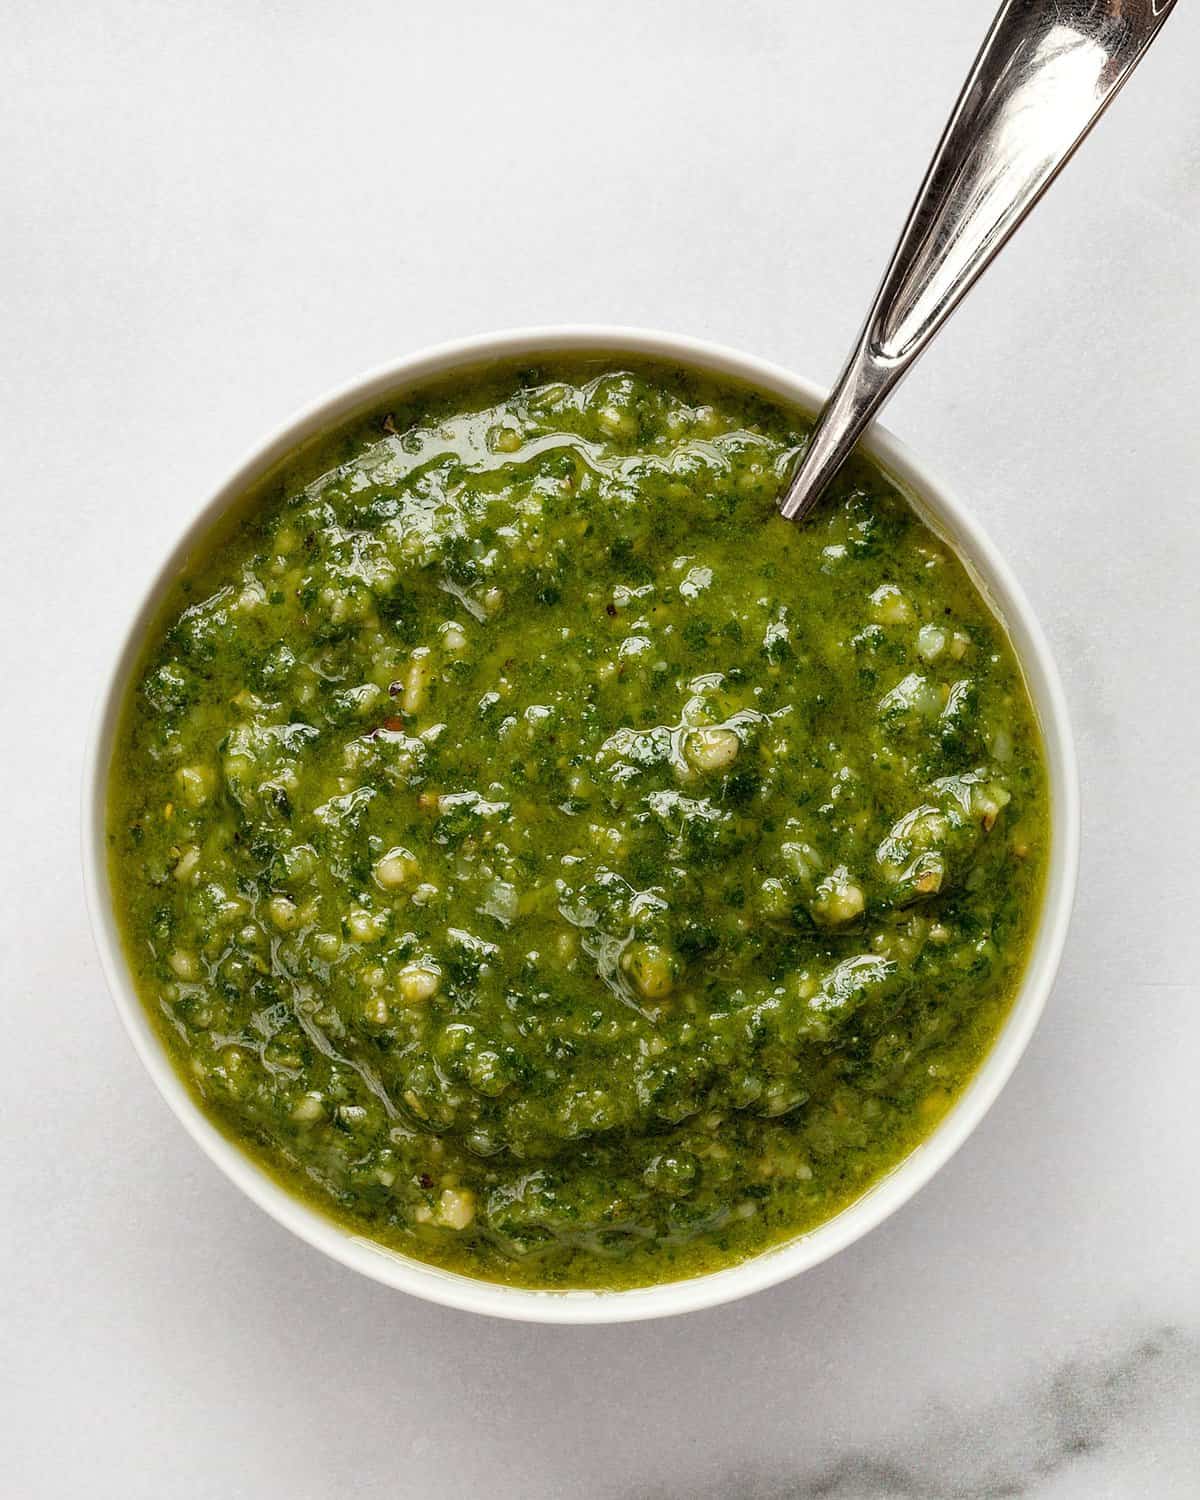 Basil pesto in a small bowl with a spoon